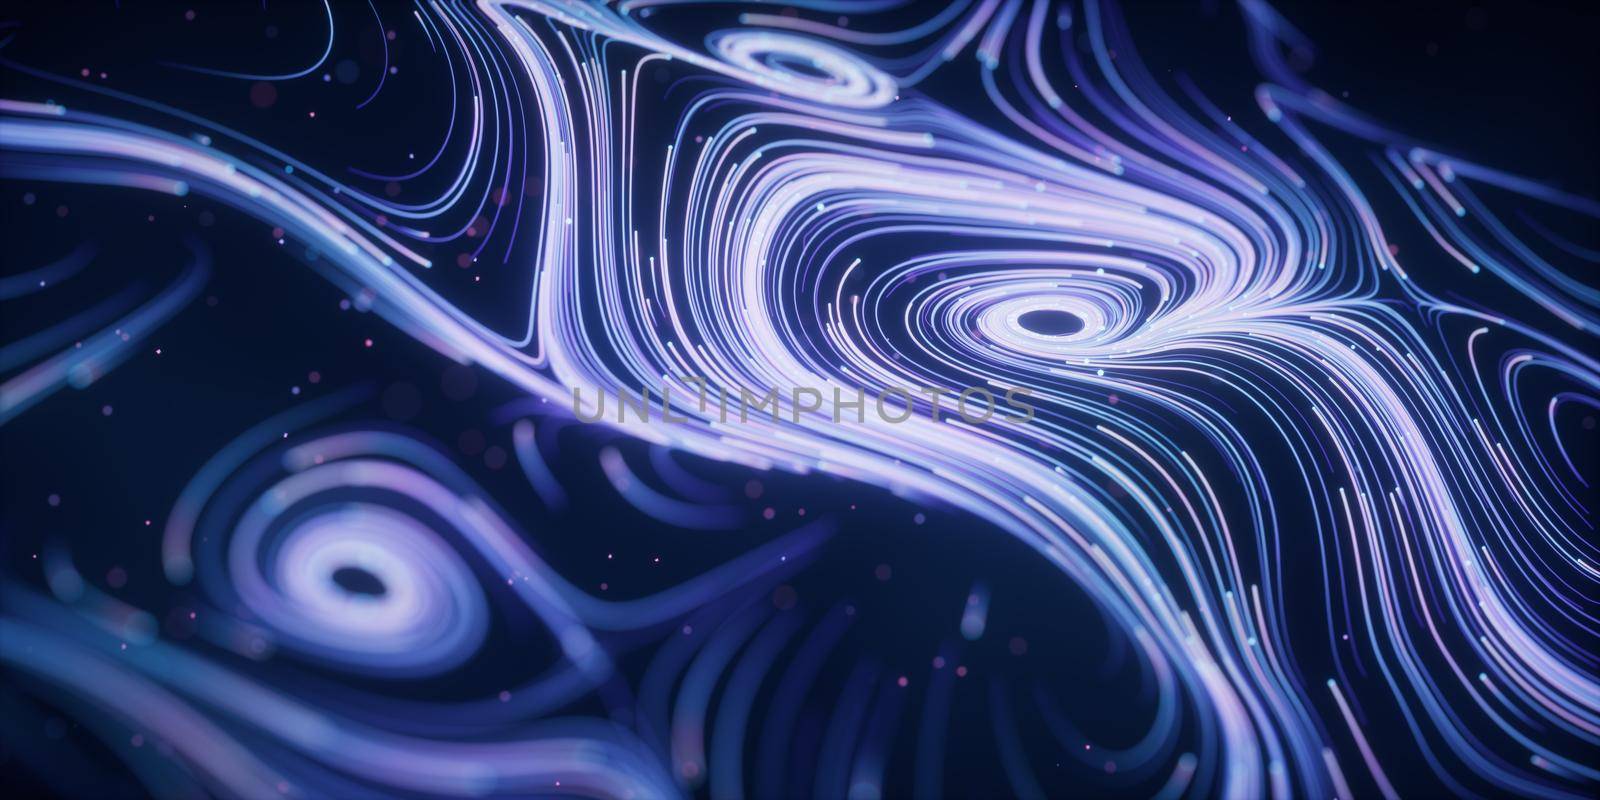 Wave particles lines with swirling pattern, 3d rendering. by vinkfan